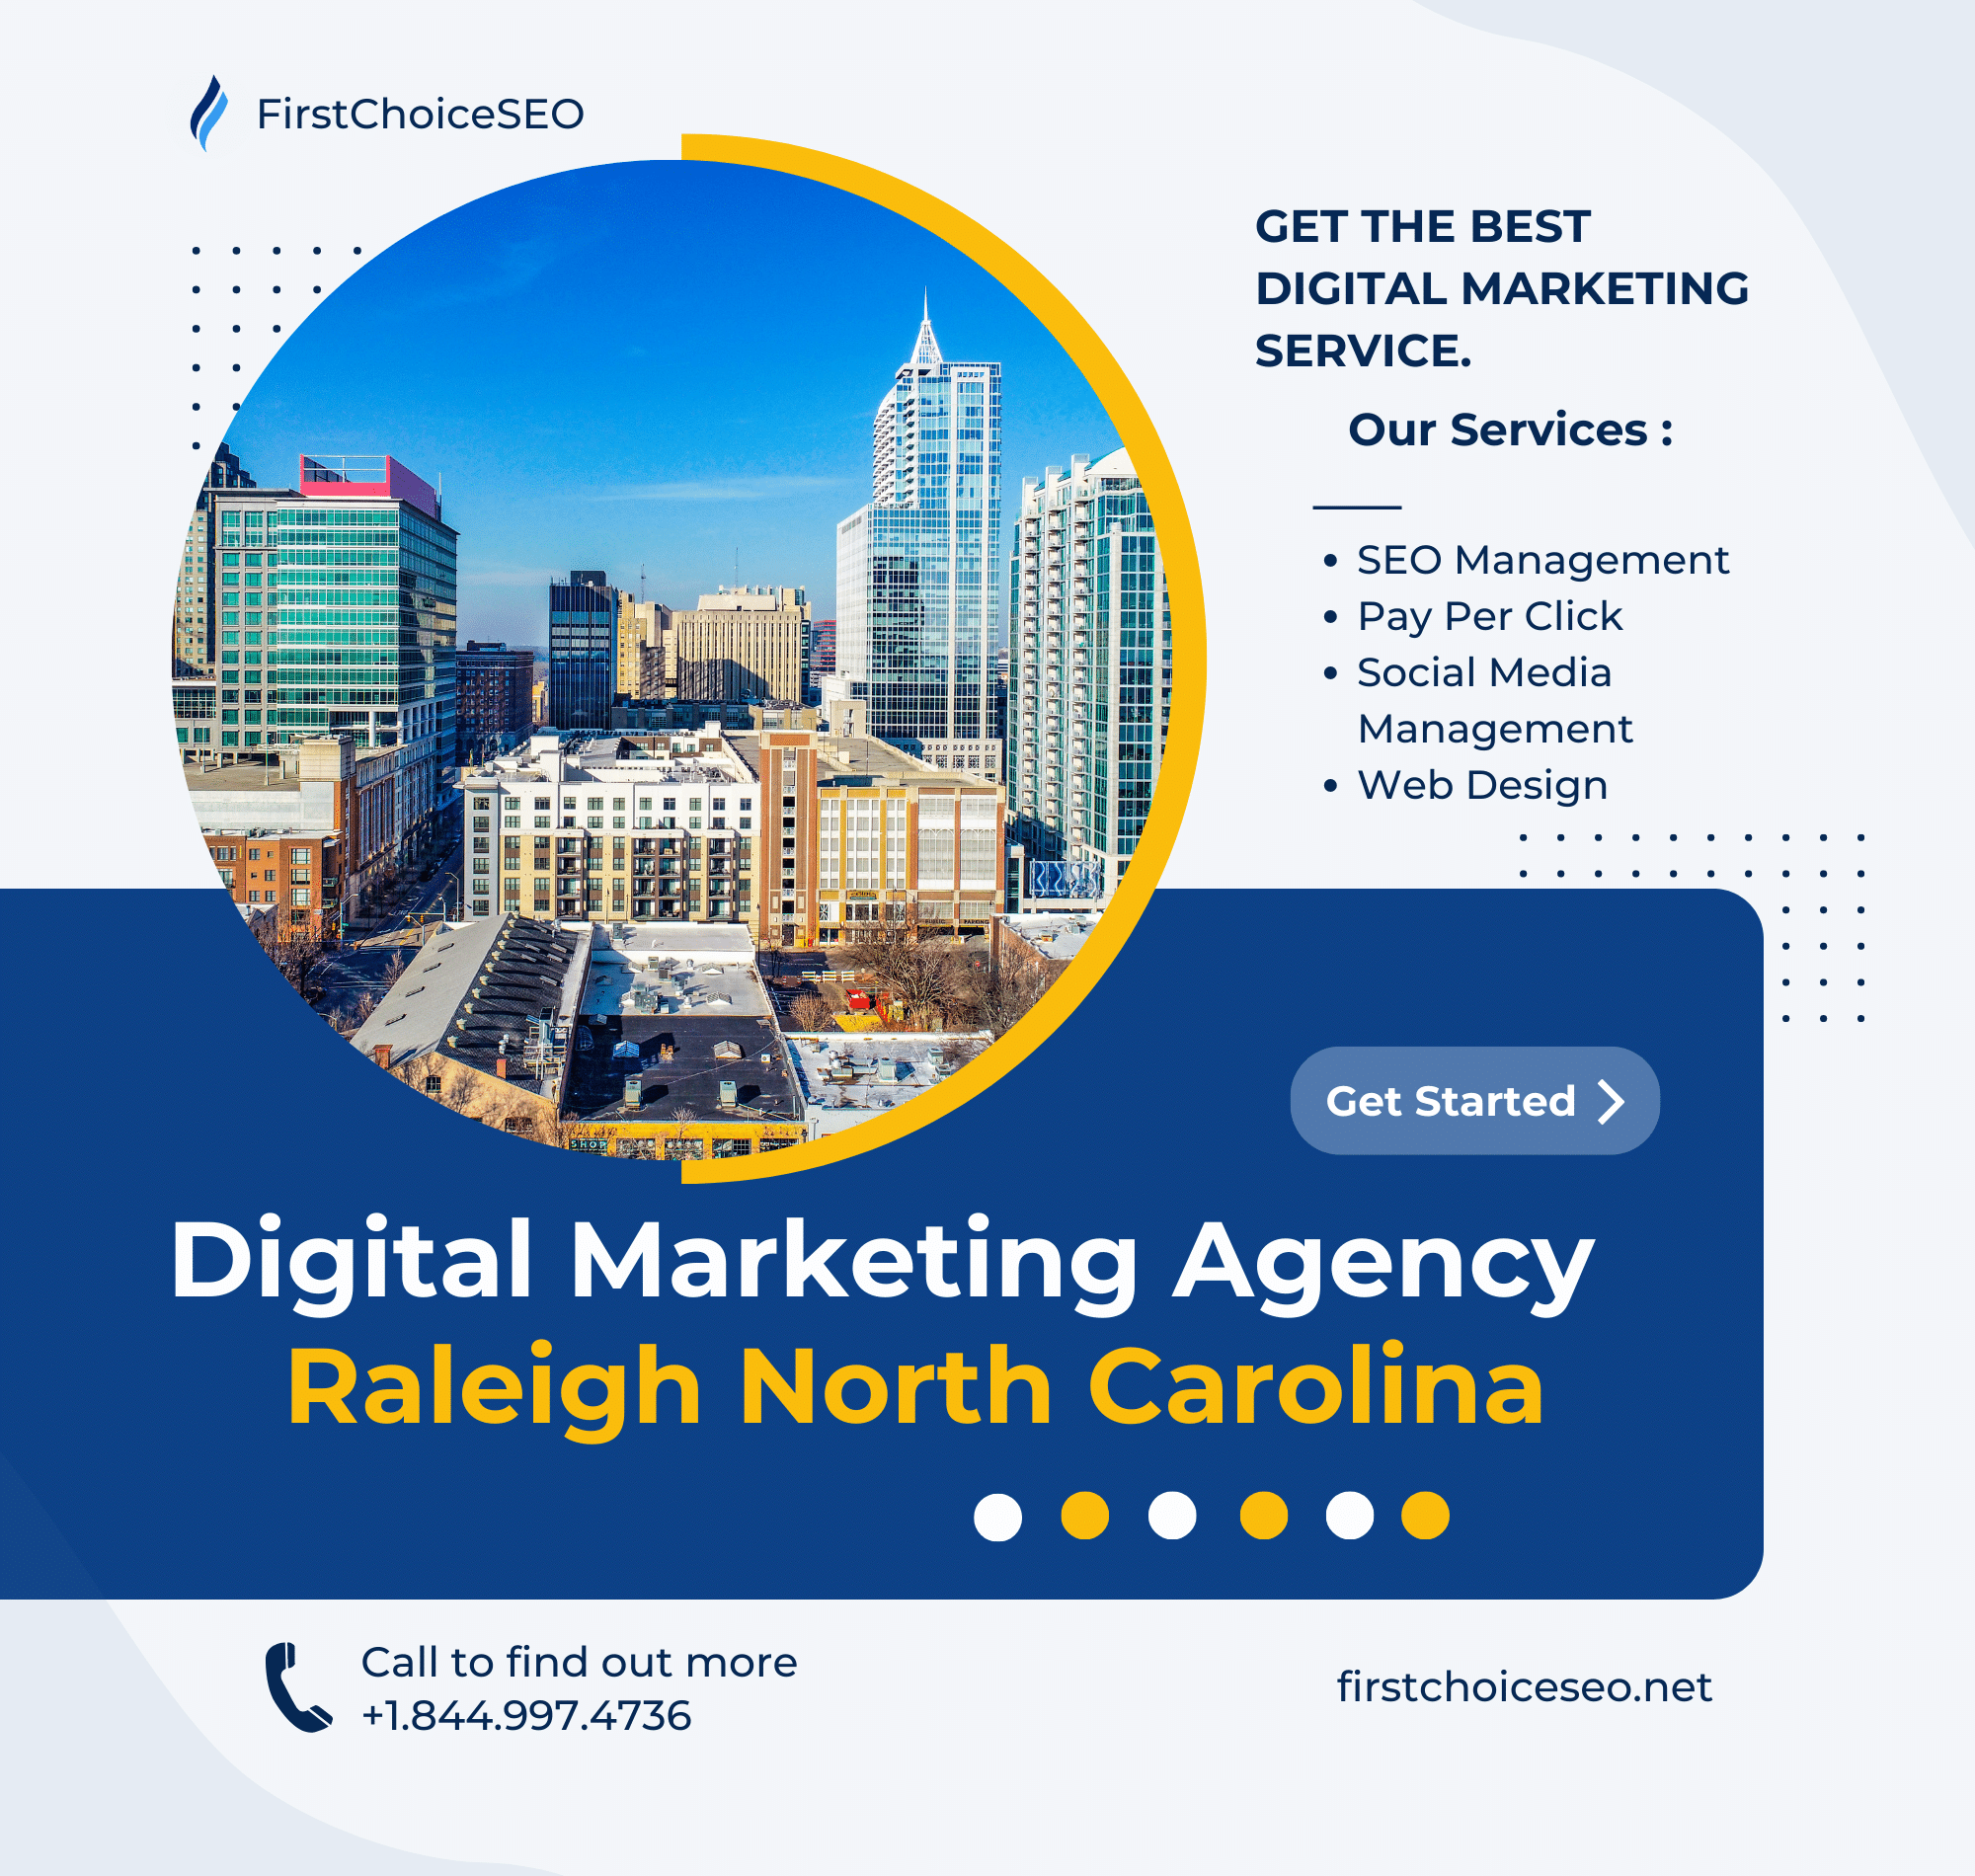 Digital Marketing Services in Raleigh NC